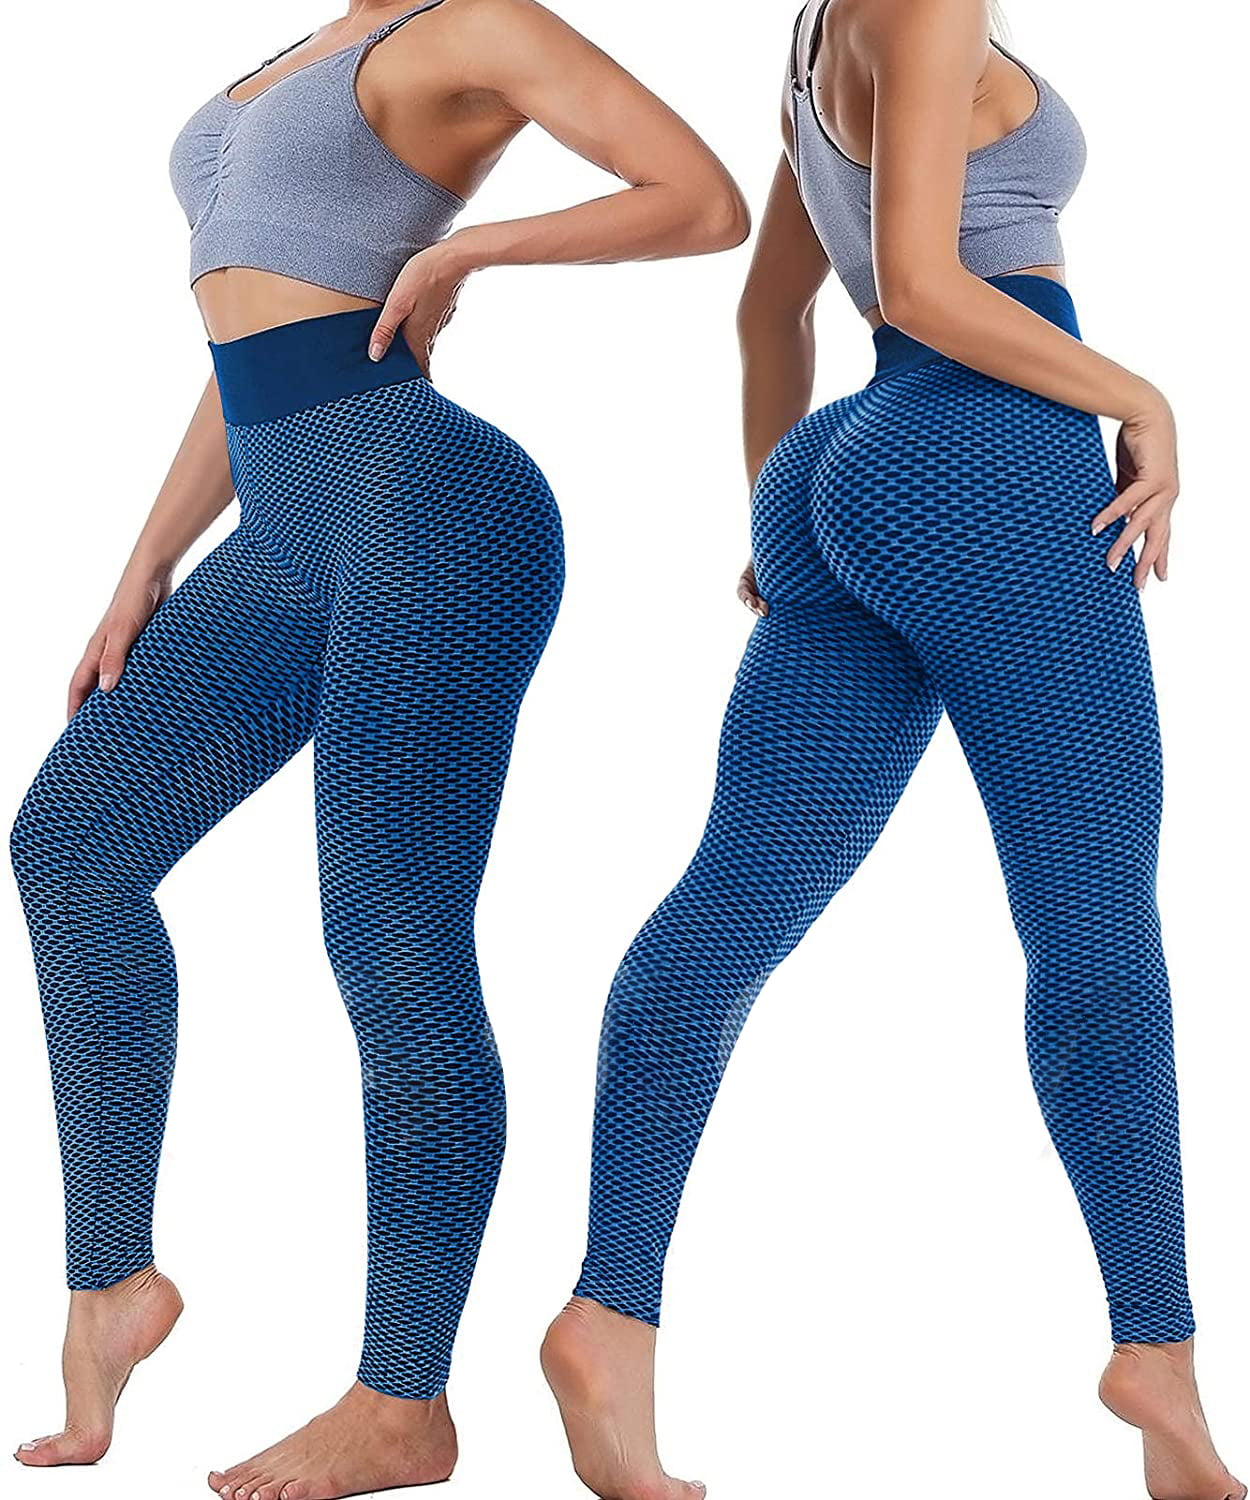 High Waisted Ribbed Textured Yoga Pants For Women Seamless Sports Leggings  For Fitness Training, Push Up Effect, And Sports Workout Tights Lulu 2023  From Lovesportjerseys, $4.62